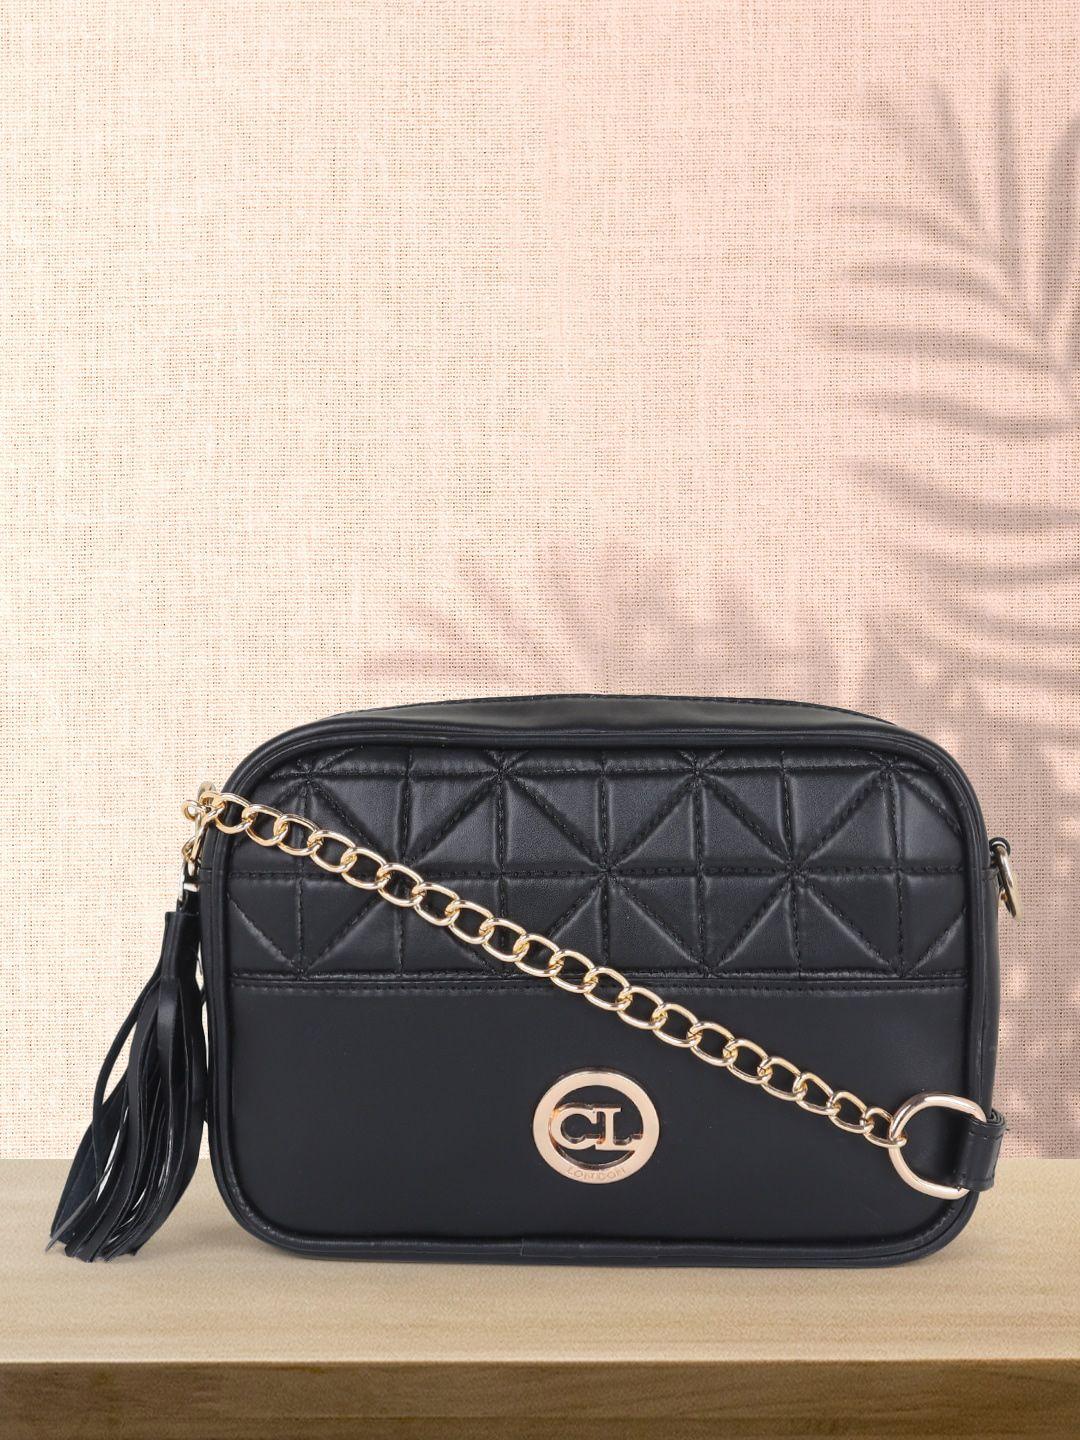 carlton london black sling bag with quilted